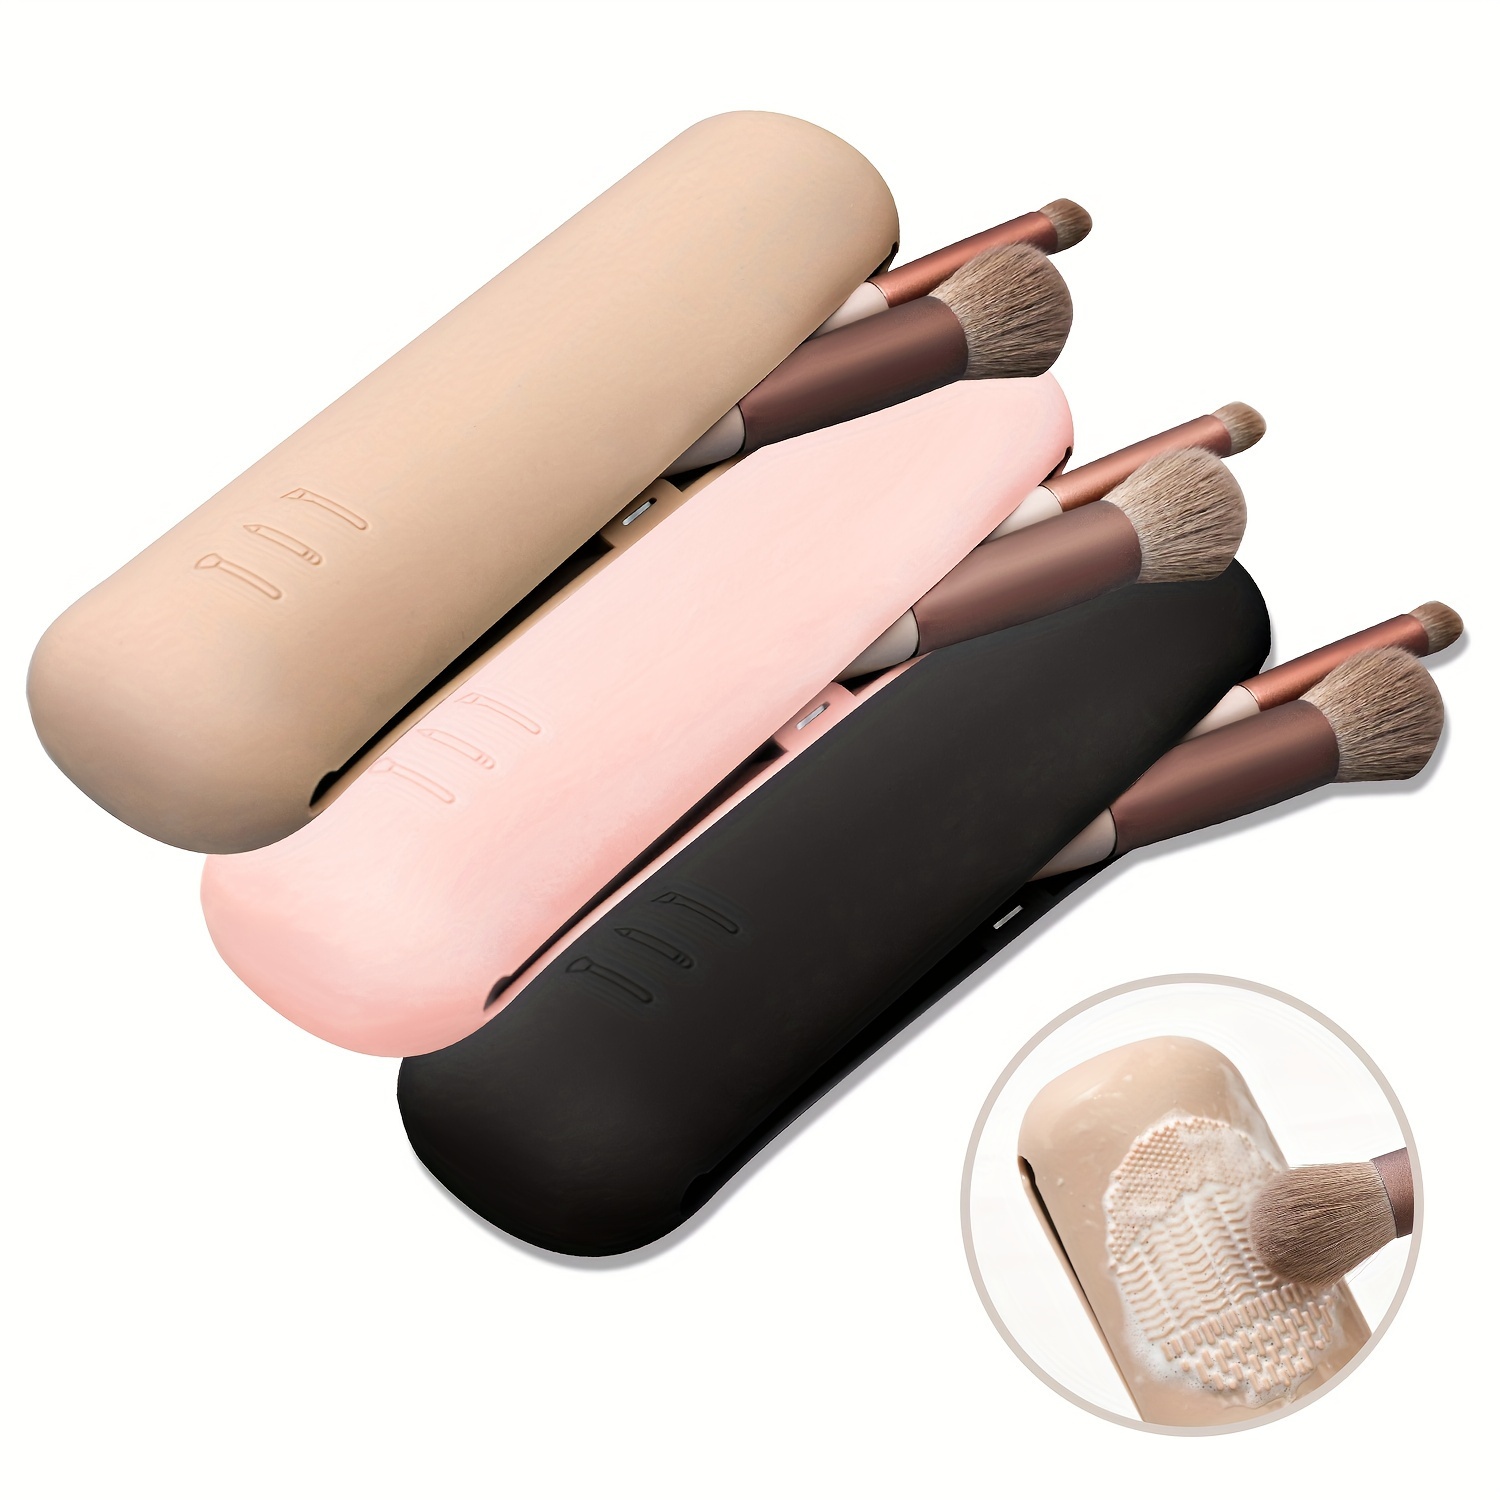 Jlong Travel Makeup Brush Holder, Silicon Portable Cosmetic Face Brushes  Holder, Soft Makeup Tools Organizer for Travel with Magnetic Closure,1PACK  